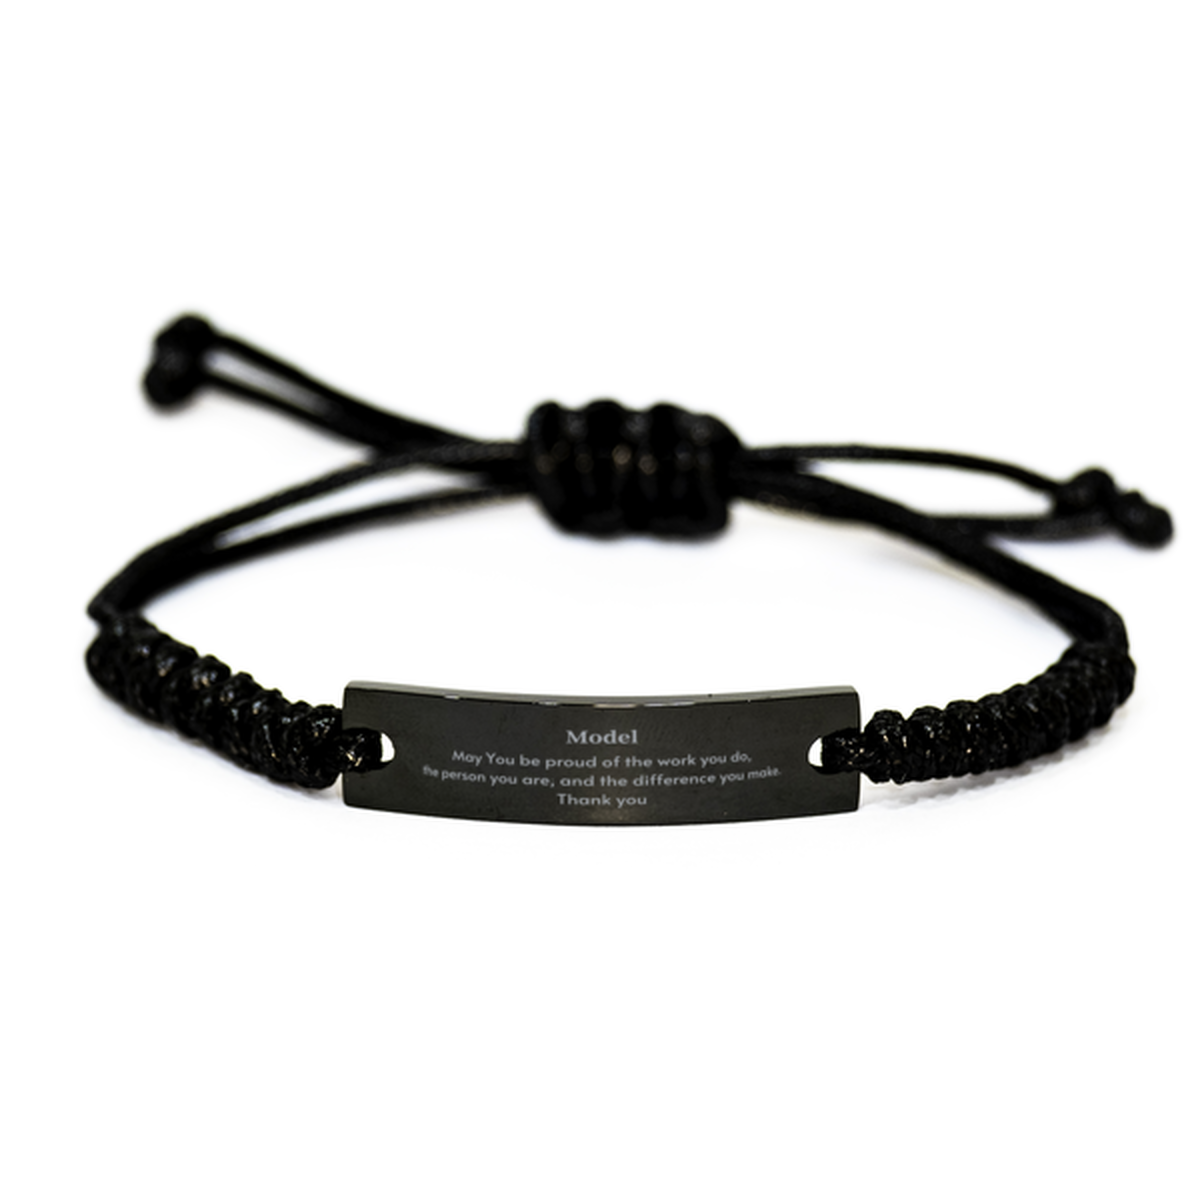 Heartwarming Black Rope Bracelet Retirement Coworkers Gifts for Model, Model May You be proud of the work you do, the person you are Gifts for Boss Men Women Friends